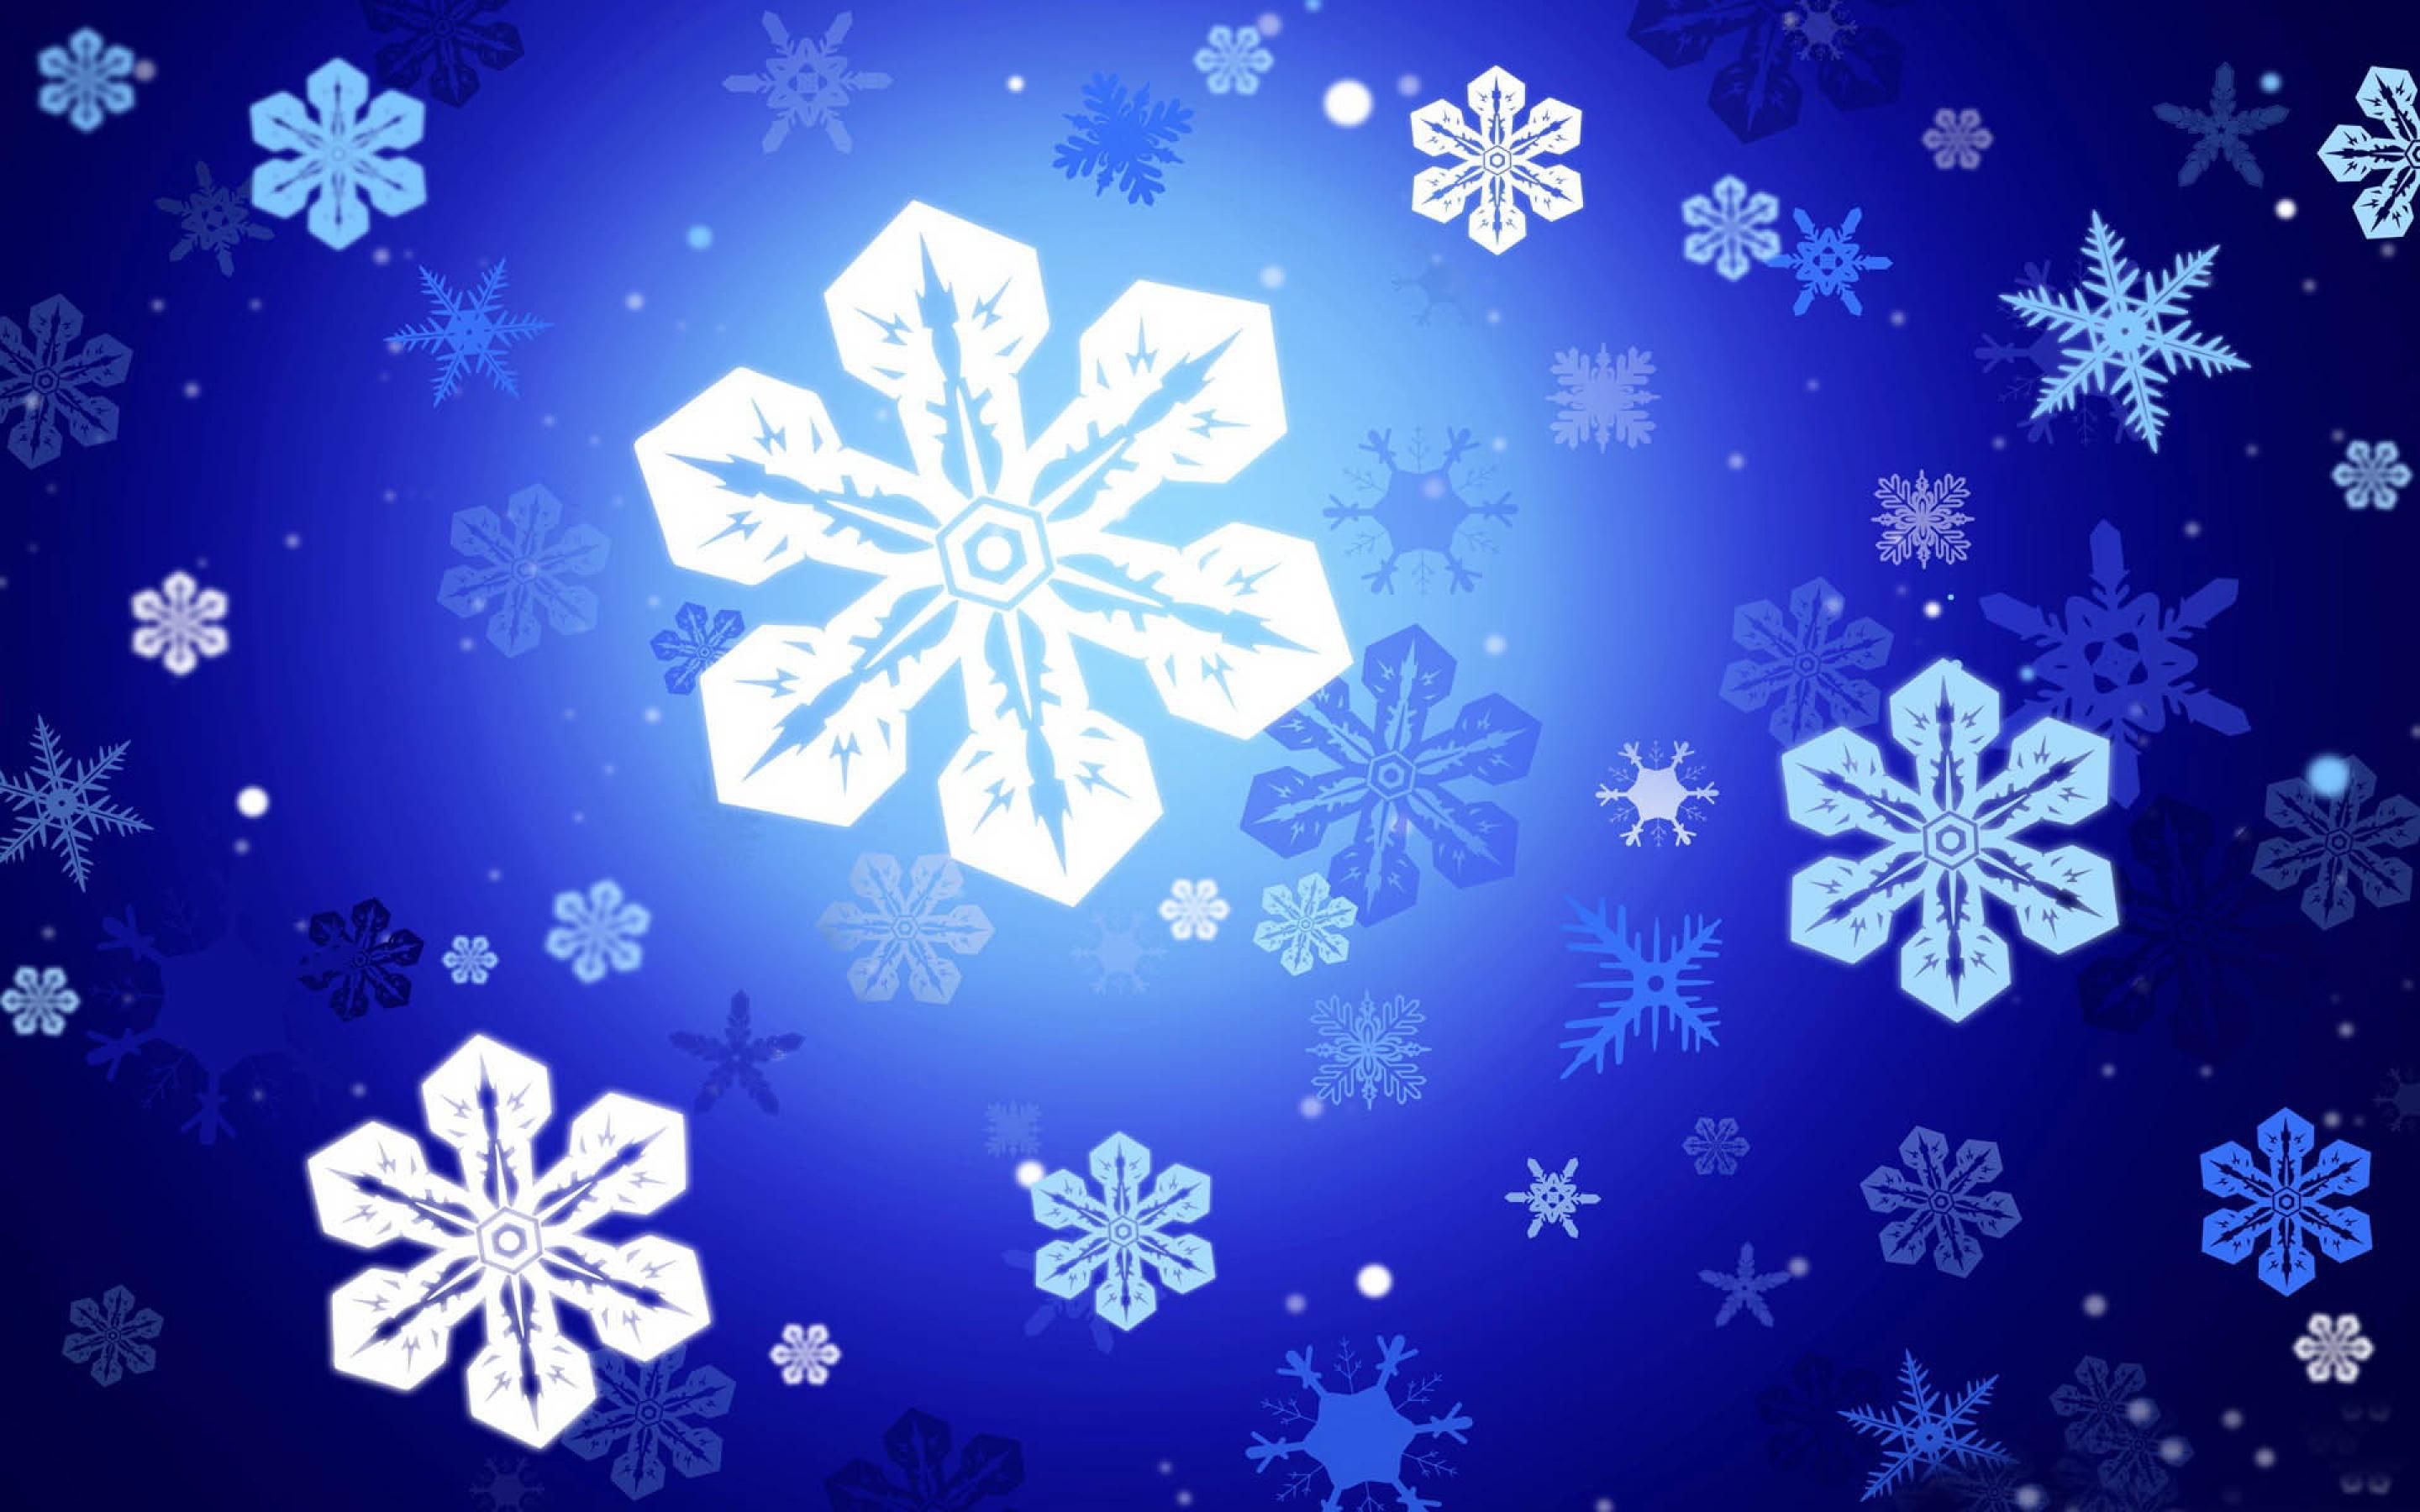 Snowflakes on a blue background wallpapers and images - wallpapers